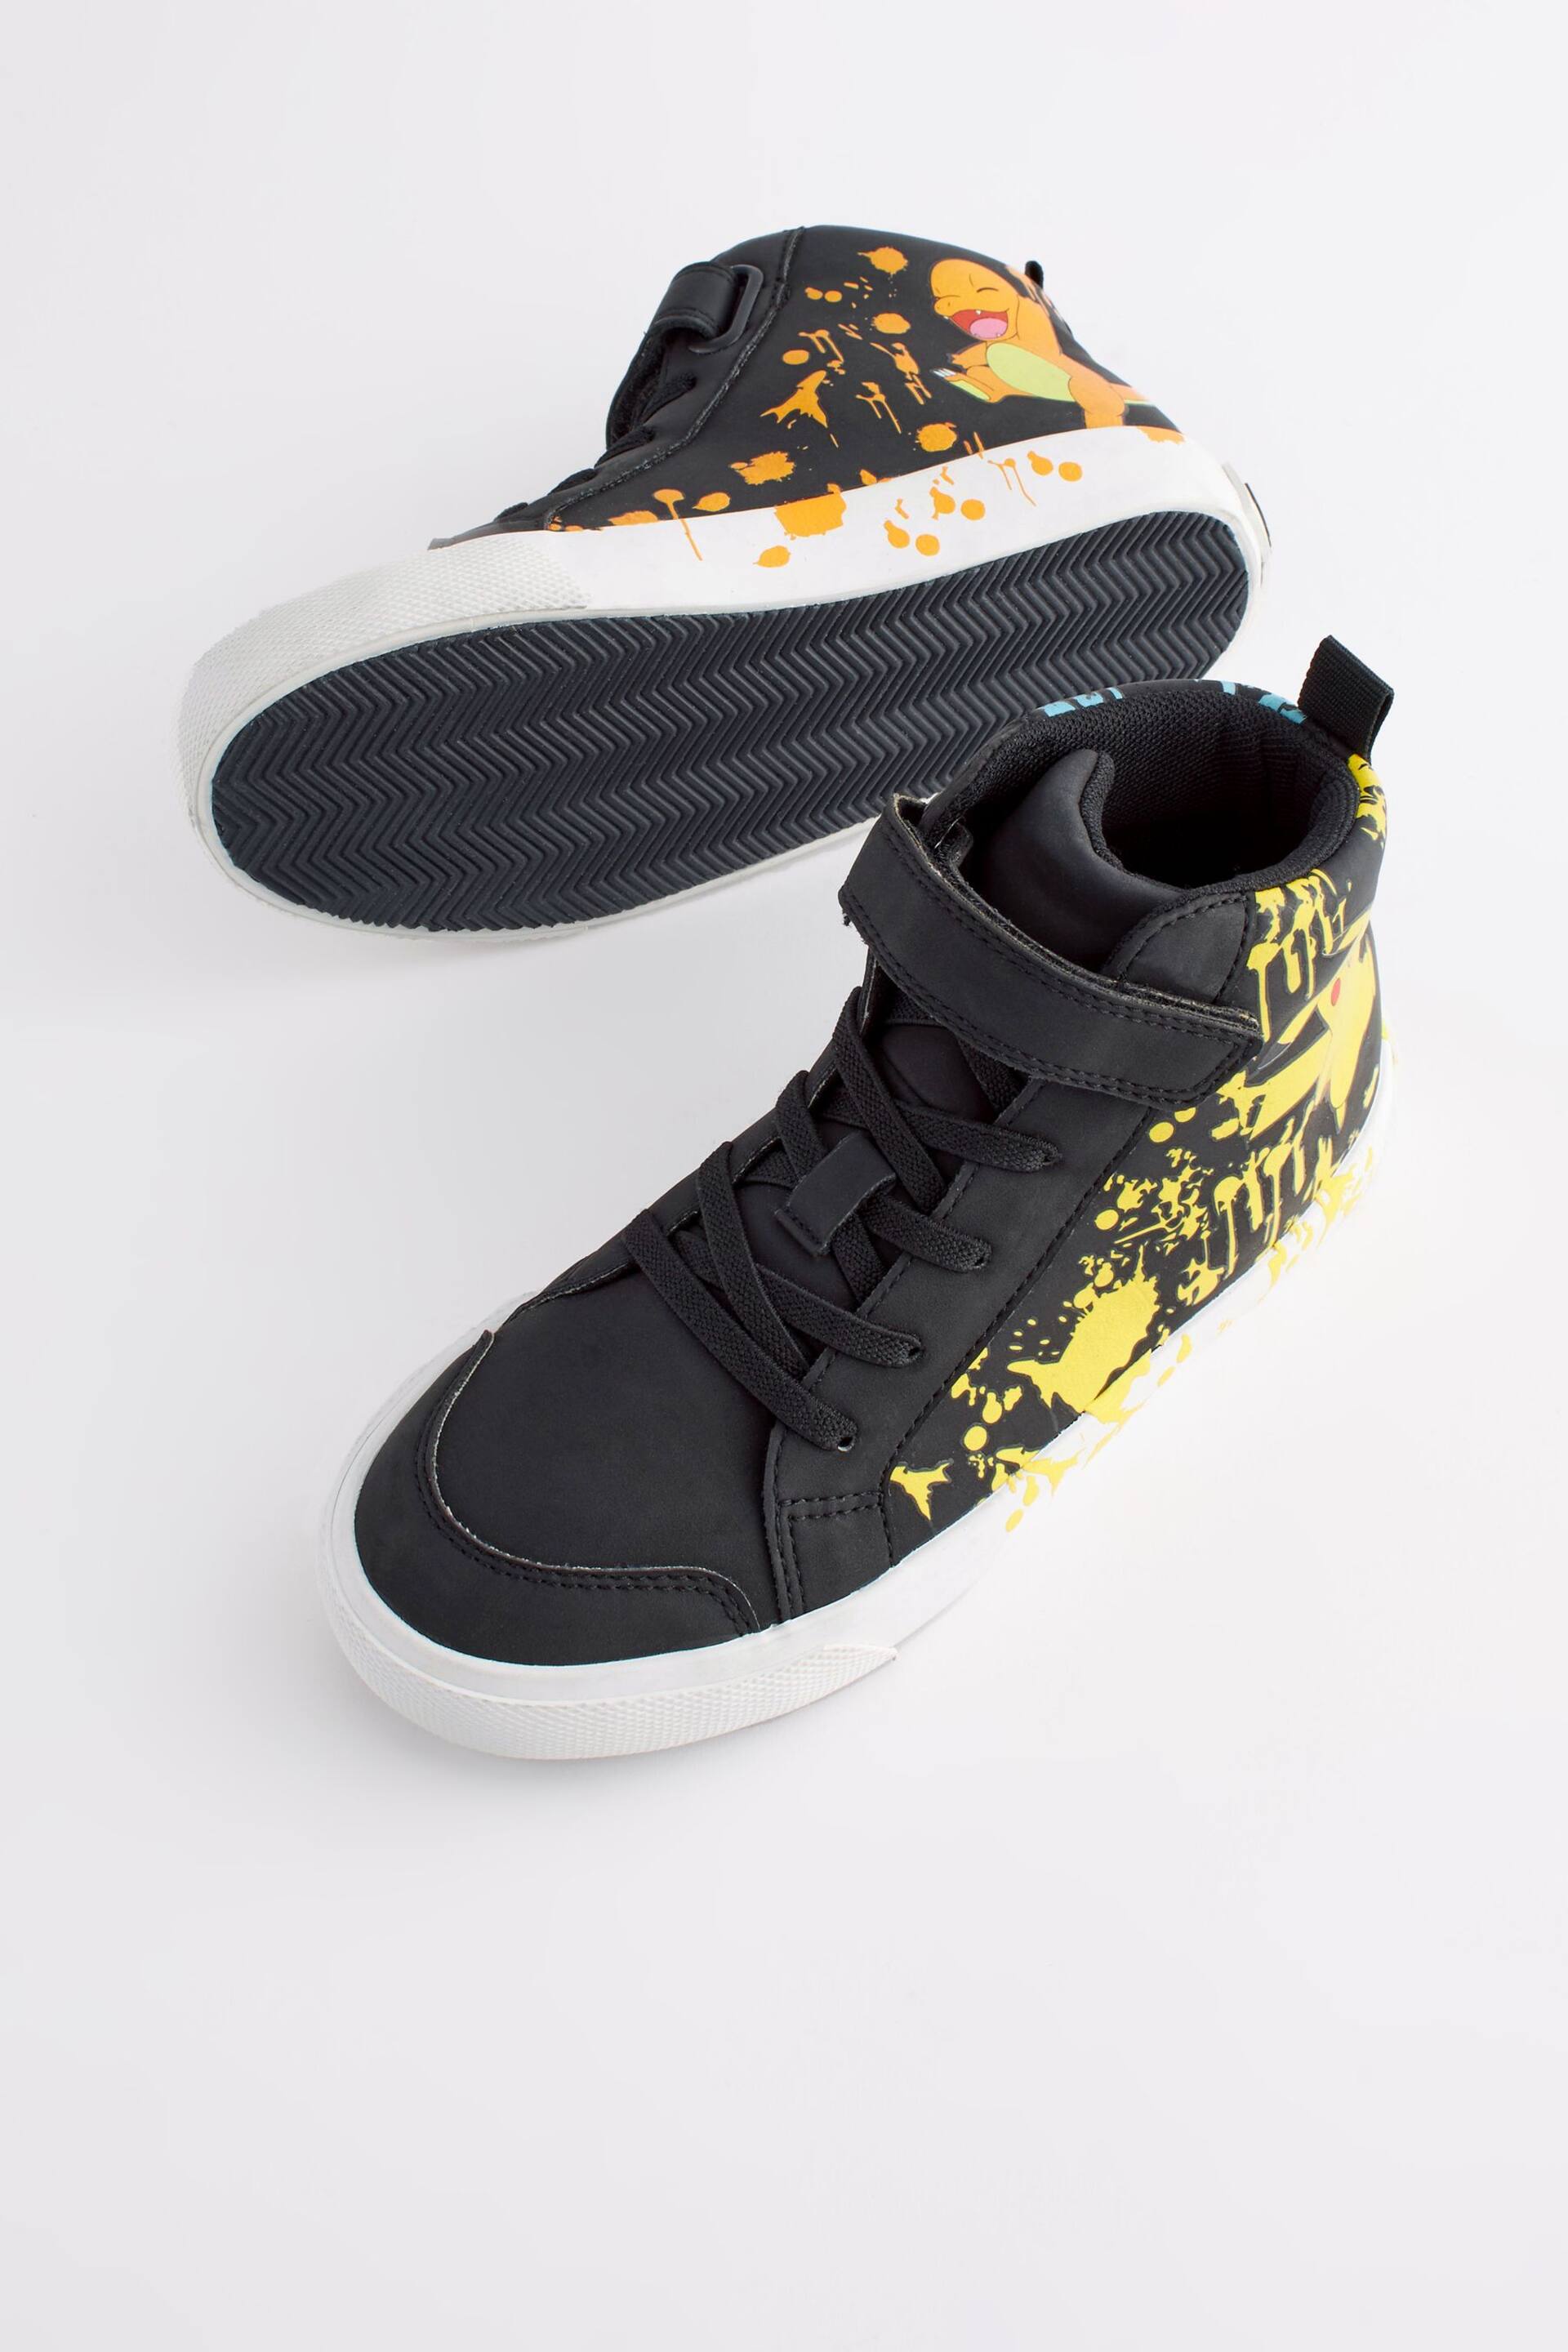 Pokemon Black Elastic Lace High Top Trainers - Image 4 of 6